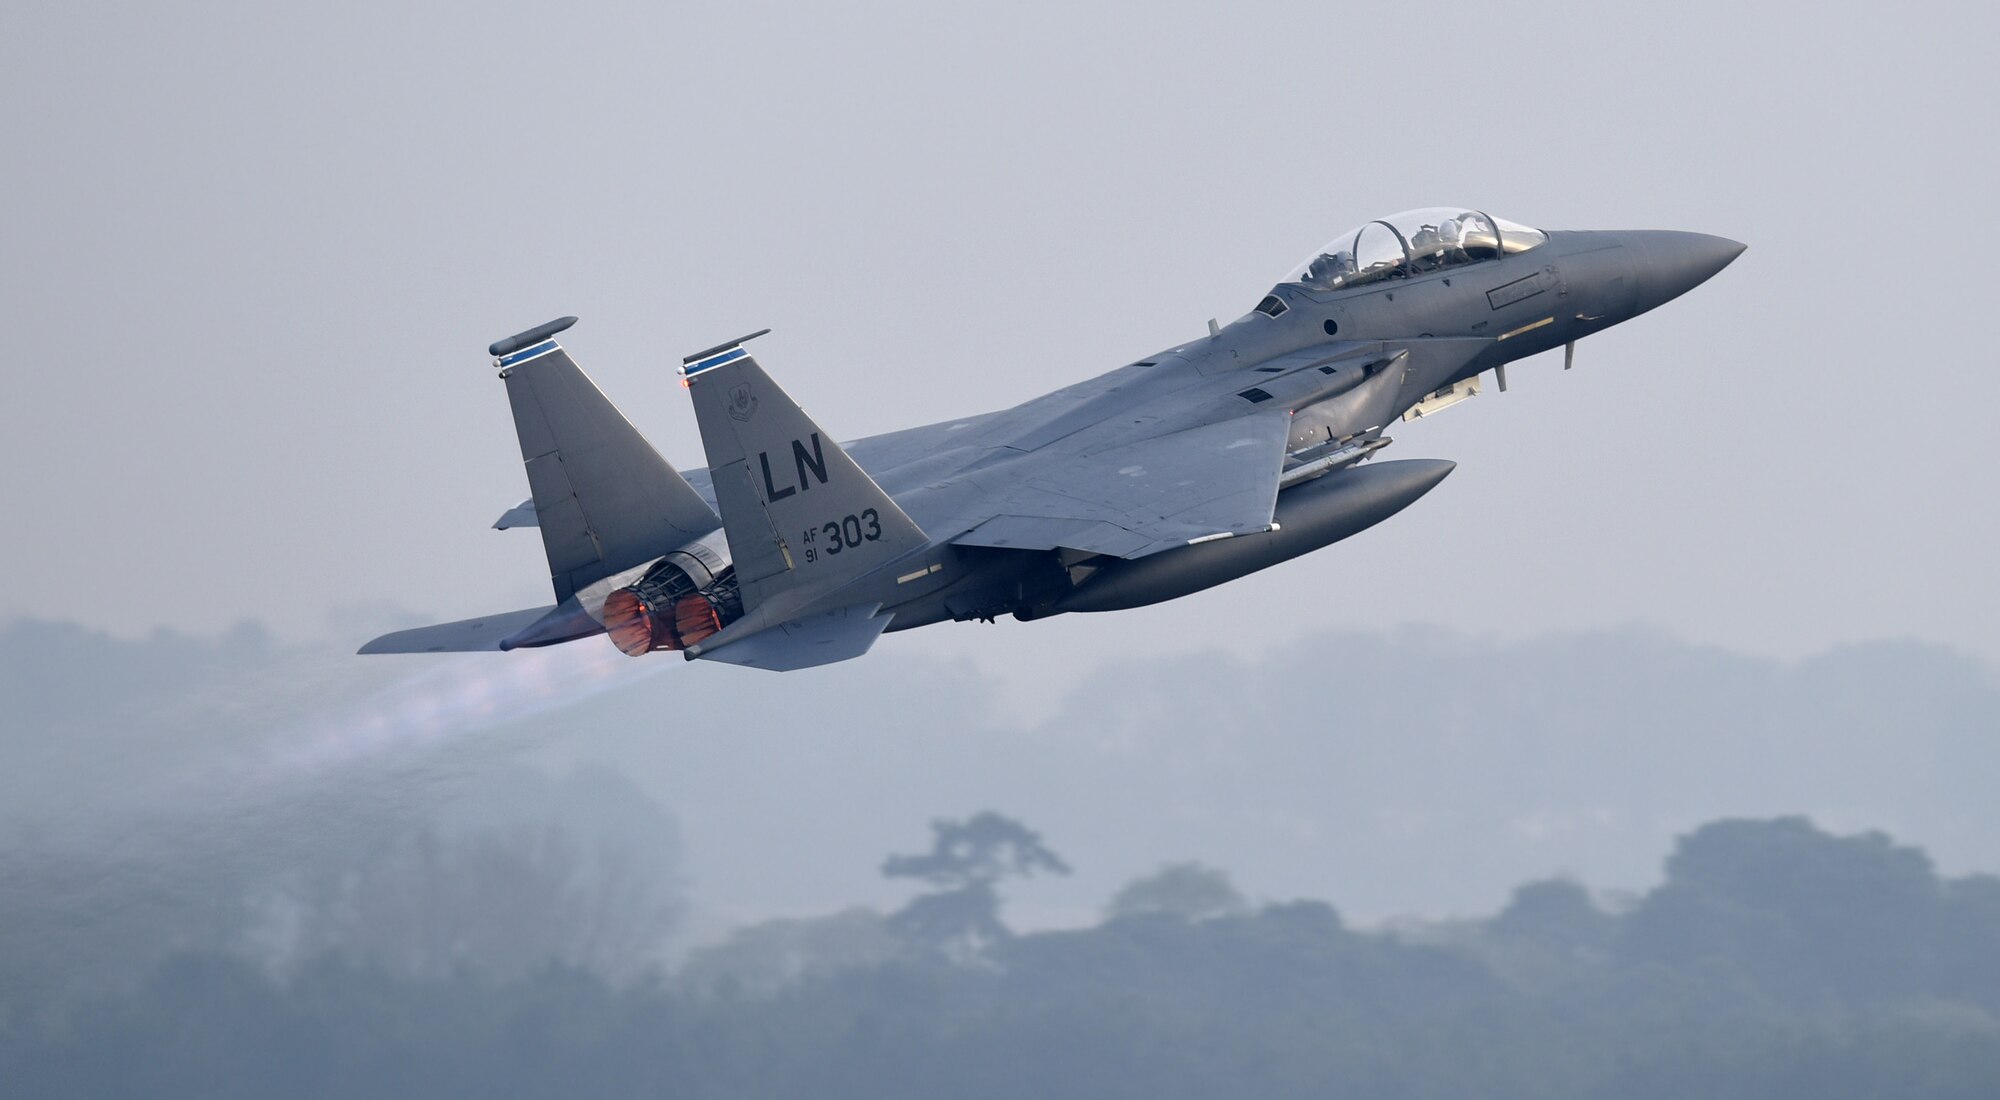 An F-15E Strike Eagle assigned to the 492nd Fighter Squadron takes off from the flight line at Royal Air Force Lakenheath, England, April 24, 2019. The 48th Fighter Wing is participating in a readiness exercise from 23-25 April focused on continuous operations over a 48-hour period. (U.S. Air Force photo by Airman 1st Class Madeline Herzog)